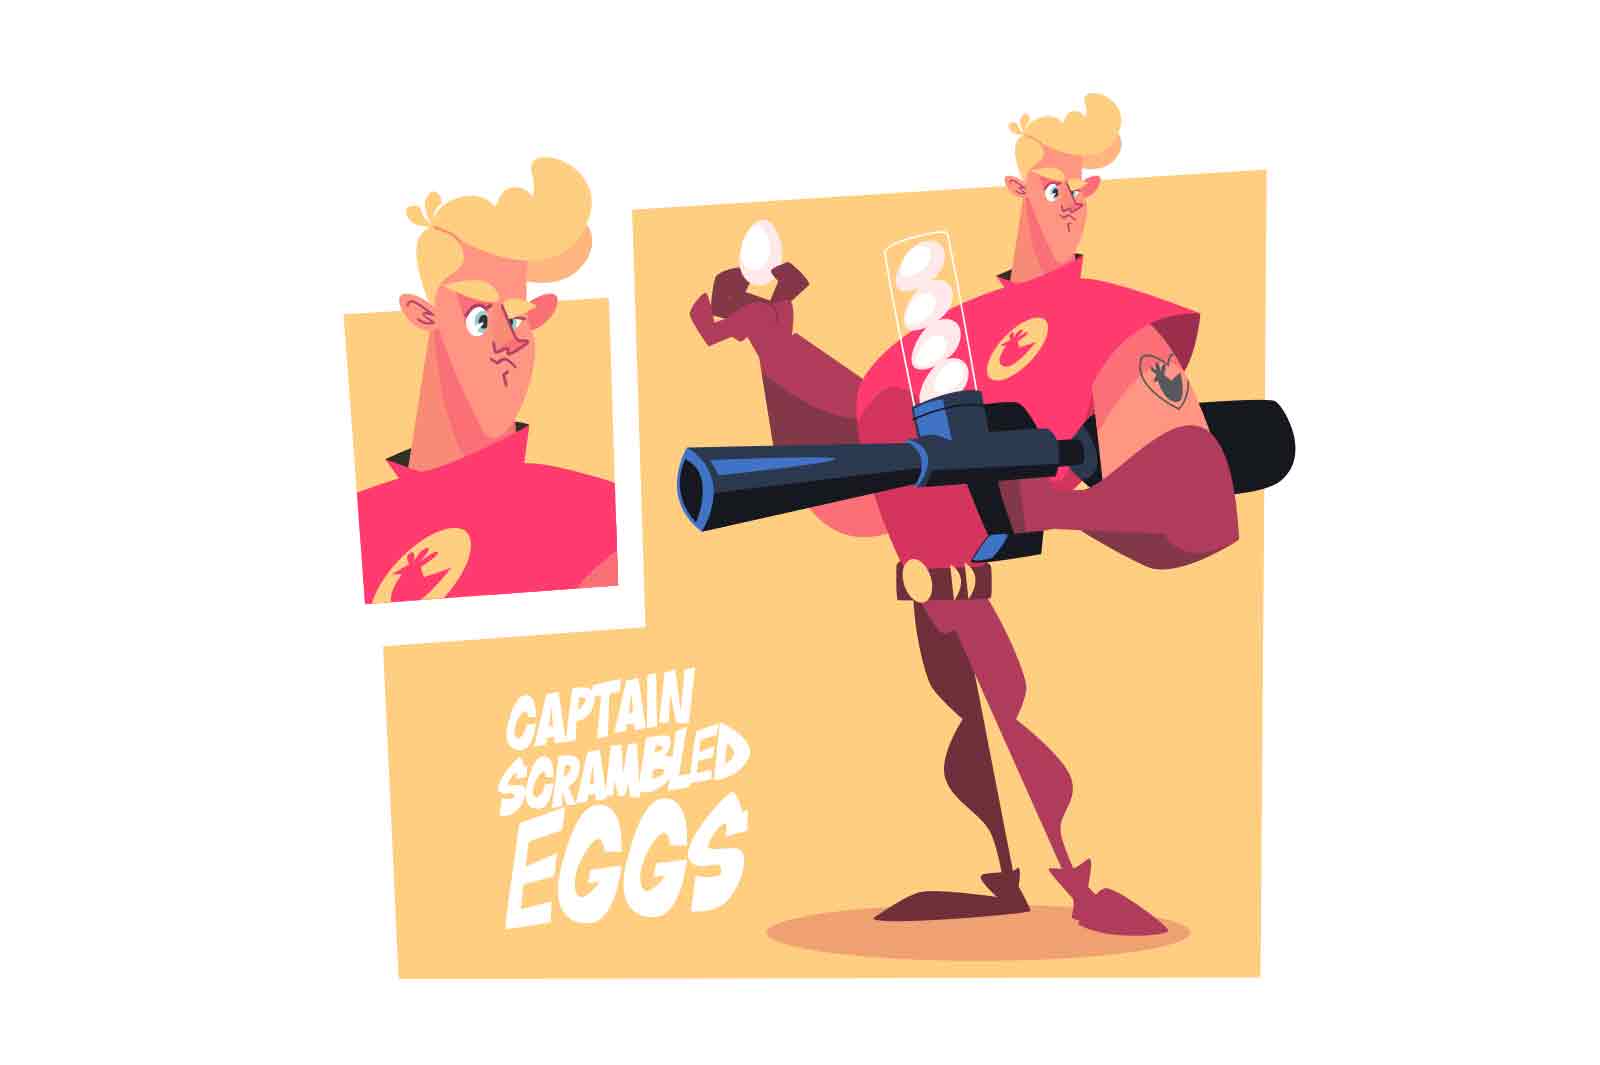 Muscular cartoon man, holds large gun that throws eggs, vector illustration. The character's face appears somewhat confused.